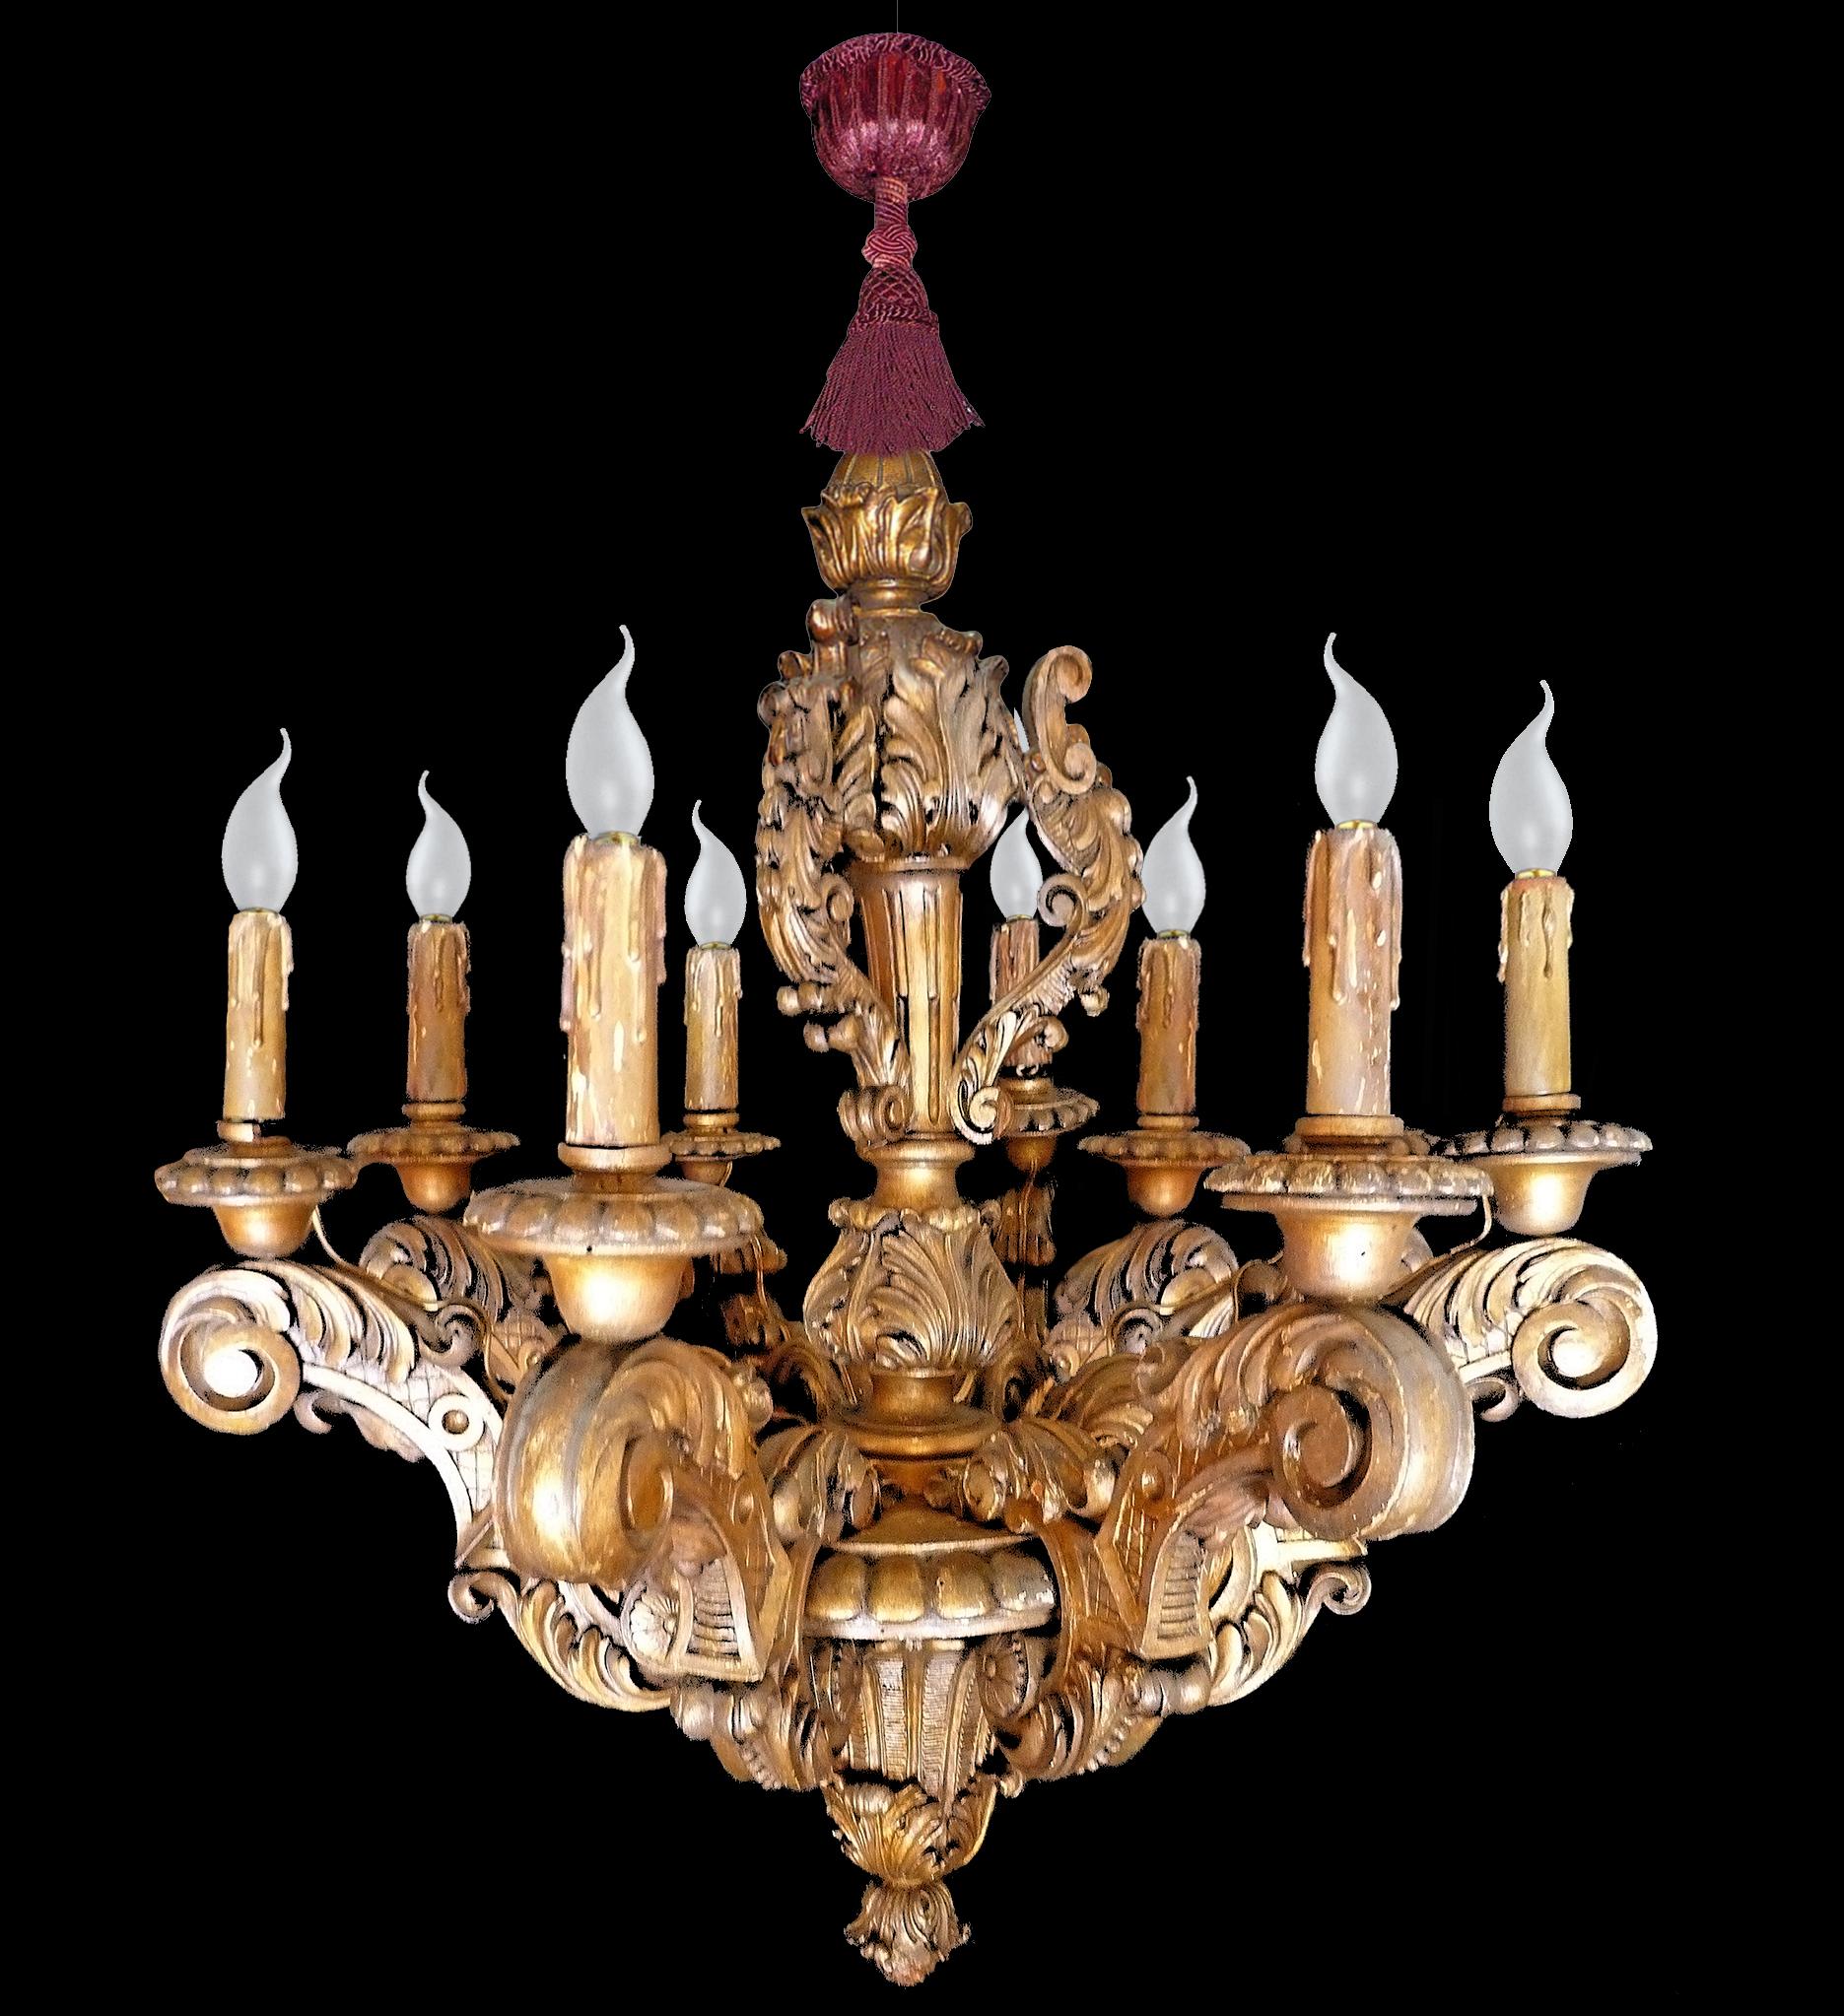 Large neoclassic wood carved gold leaf Baroque giltwood five-light chandelier. the scrolled arms with foliate embellishment pincered to a gadrooned central knop with foliate baluster stem above and fruiting drop-finial below, 
Measures:
Diameter 40